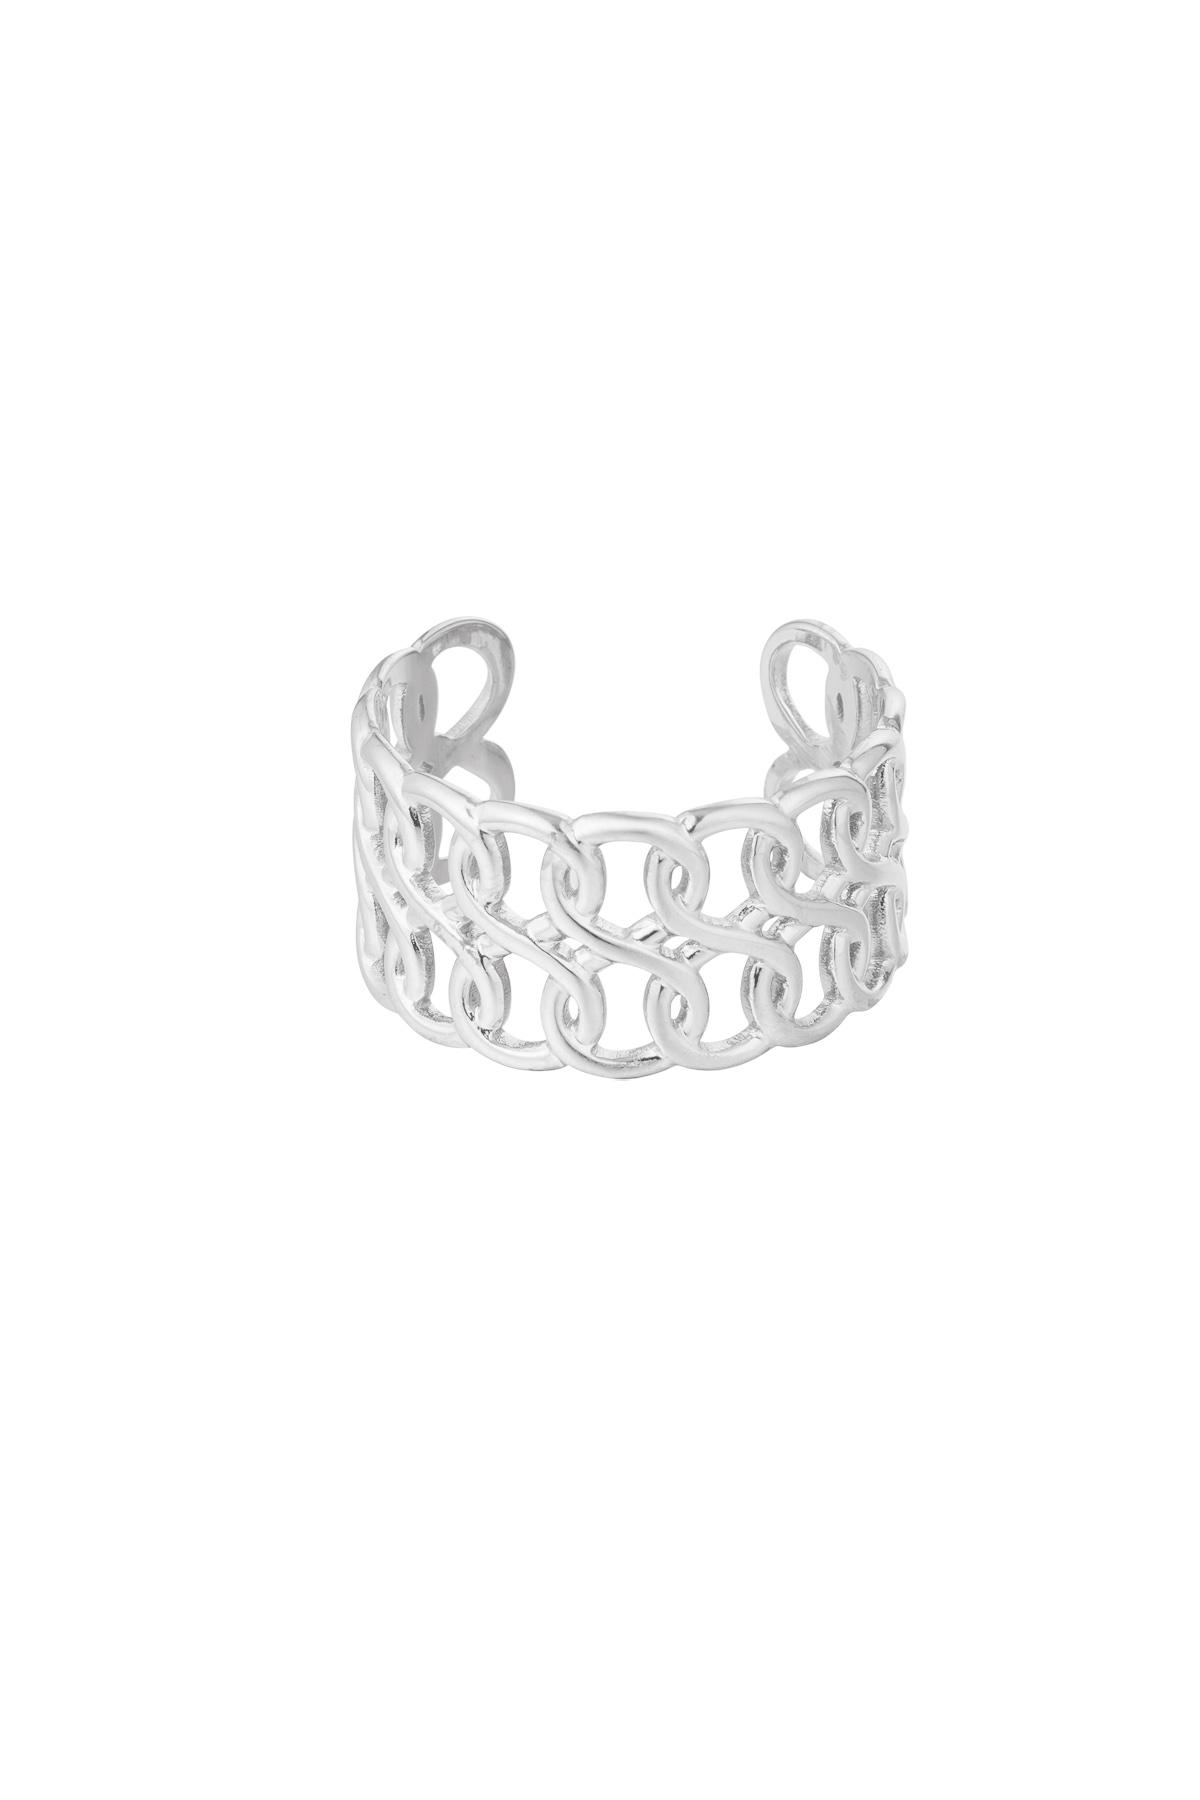 Ring special link - silver h5 